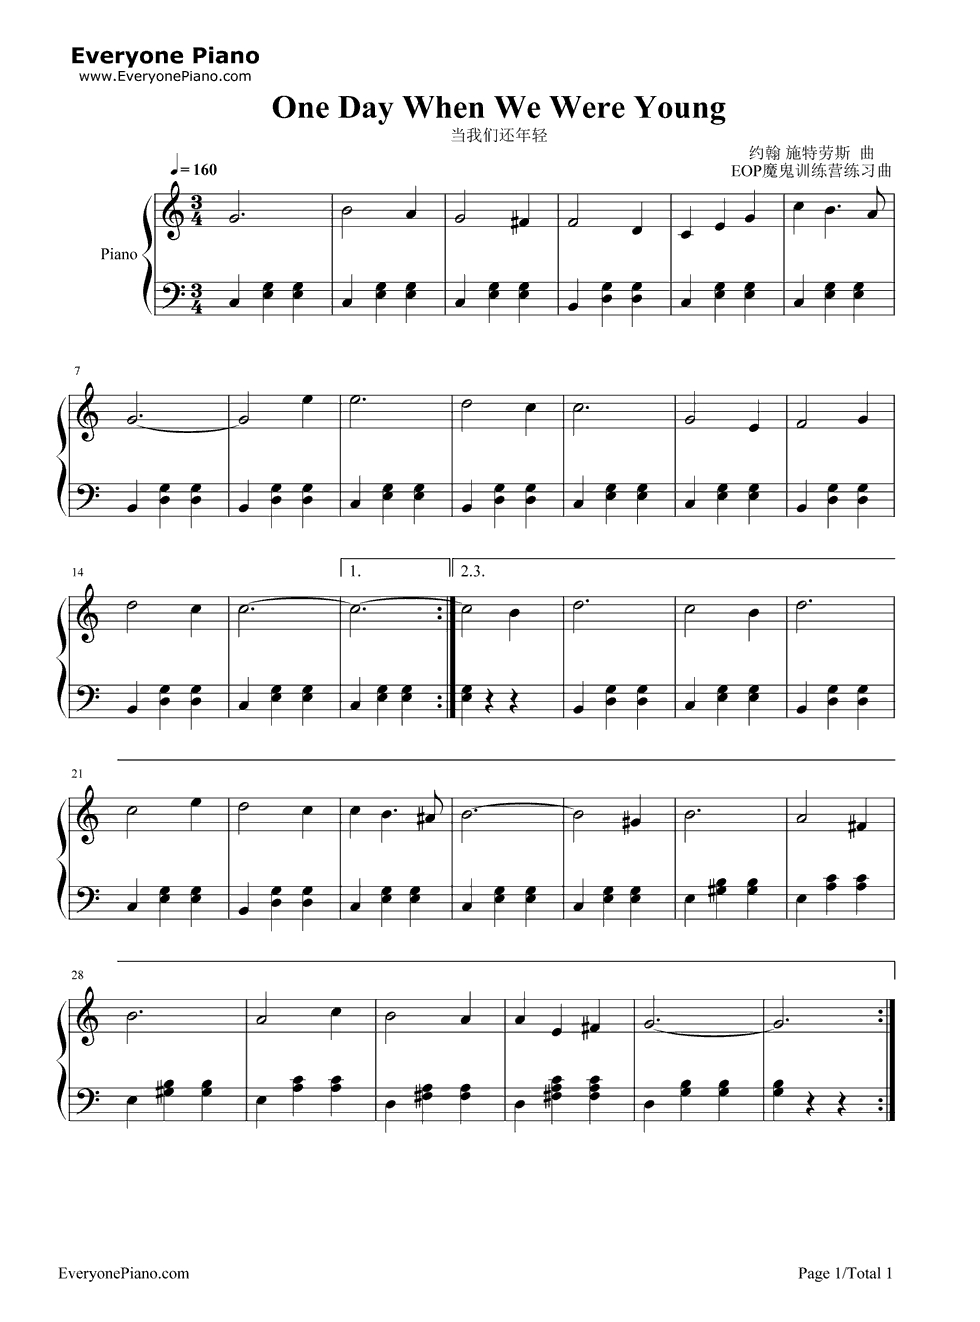 When We Were Young Chords One Day When We Were Young Free Piano Sheet Music Piano Chords